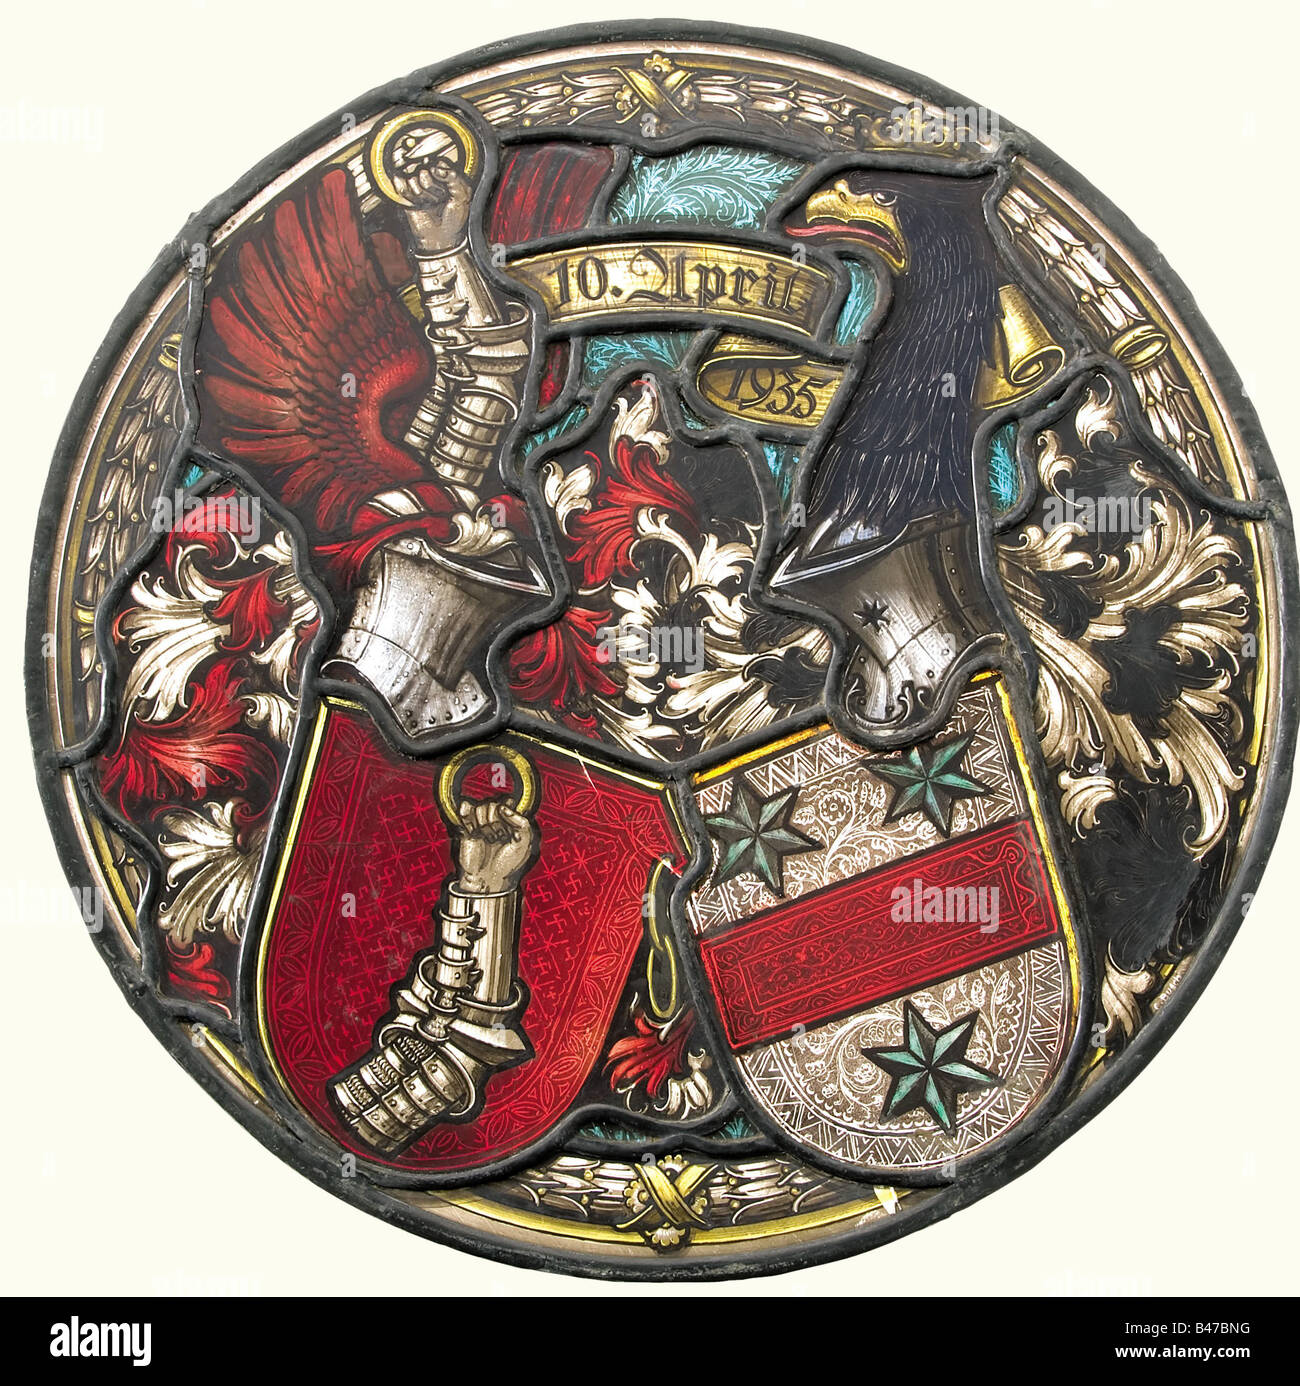 Hermann Göring and Emmy Sonnemann, a stained glass coat of arms A gift from Adolf Hitler to Hermann Göring and Emmy Sonnemann on the occasion of their wedding on 10 April 1935. Very fine coloured painting of the marriage coat of arms of the wedding pair, the shield of Göring's arms is covered with small swastikas. The wedding date, '10. April 1935' between the two helmet plumes. The artist's signature, 'C. Busch' is at the lower right. Two small flaws. Diameter 38 cm. Enclosed is a notarially certified declaration by K. Frank Korf, soldier with the US 3rd Army,, Stock Photo